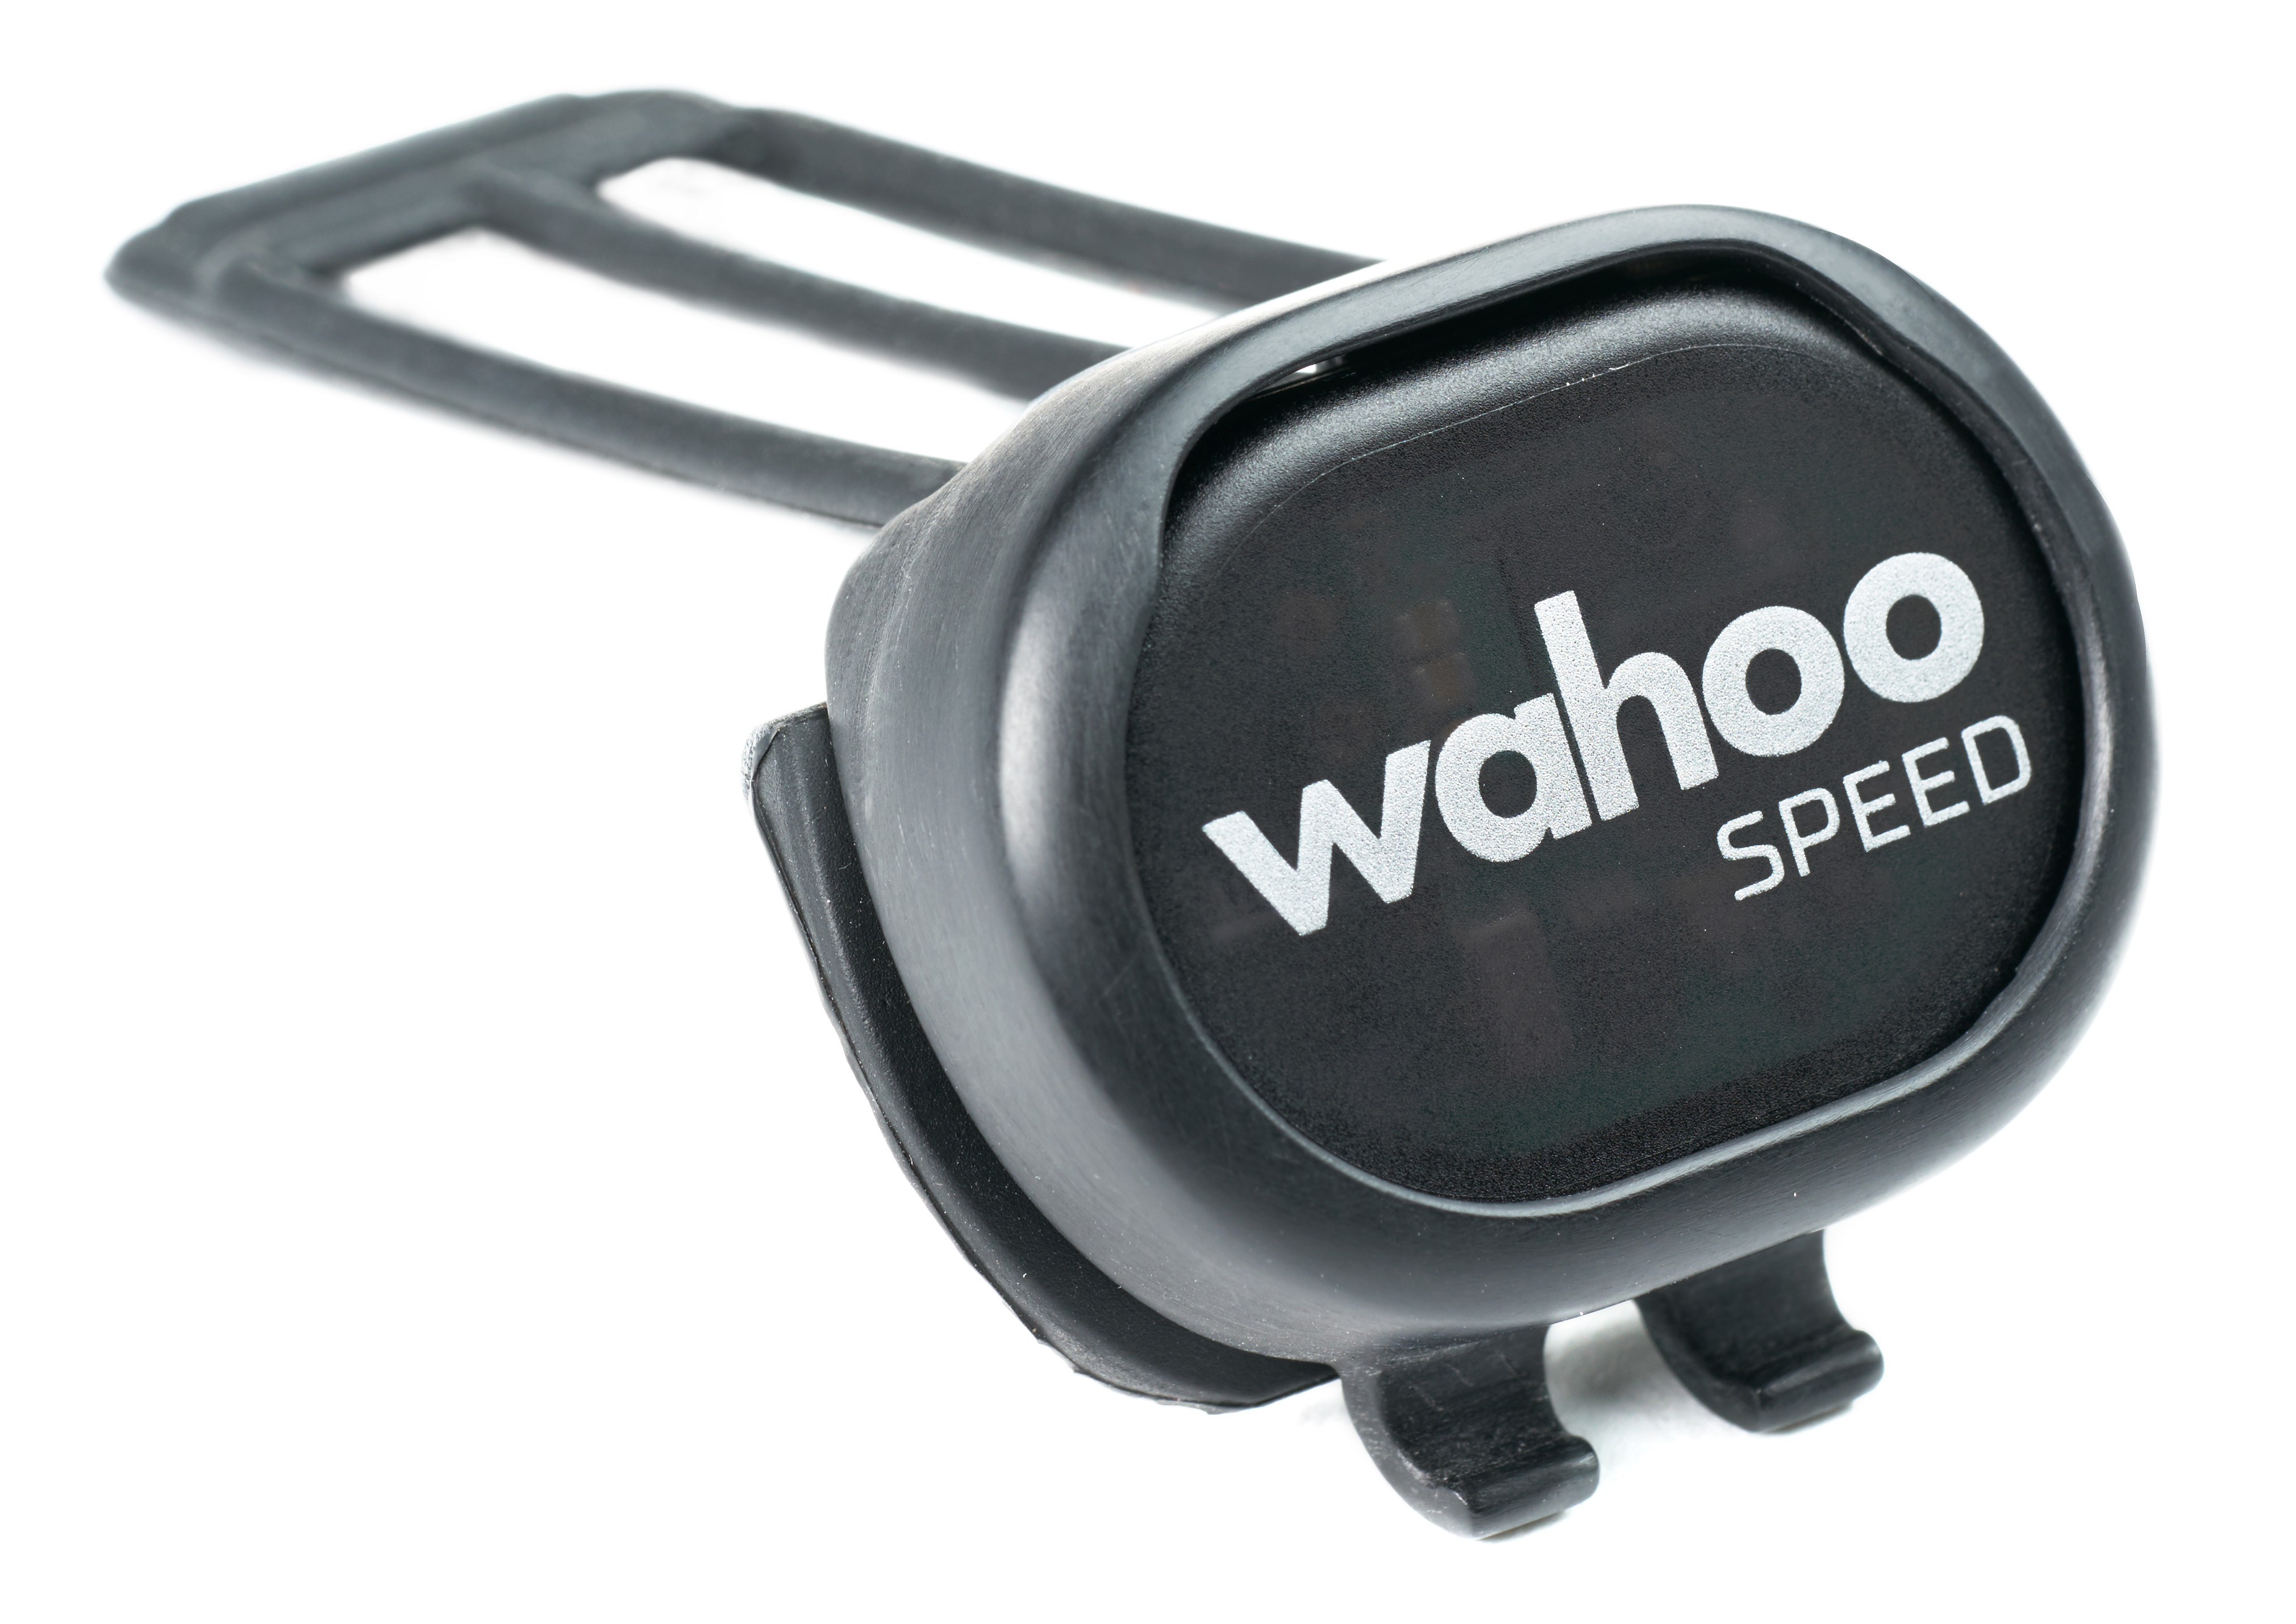 RPM Speed Information and Setup – Wahoo Fitness Support